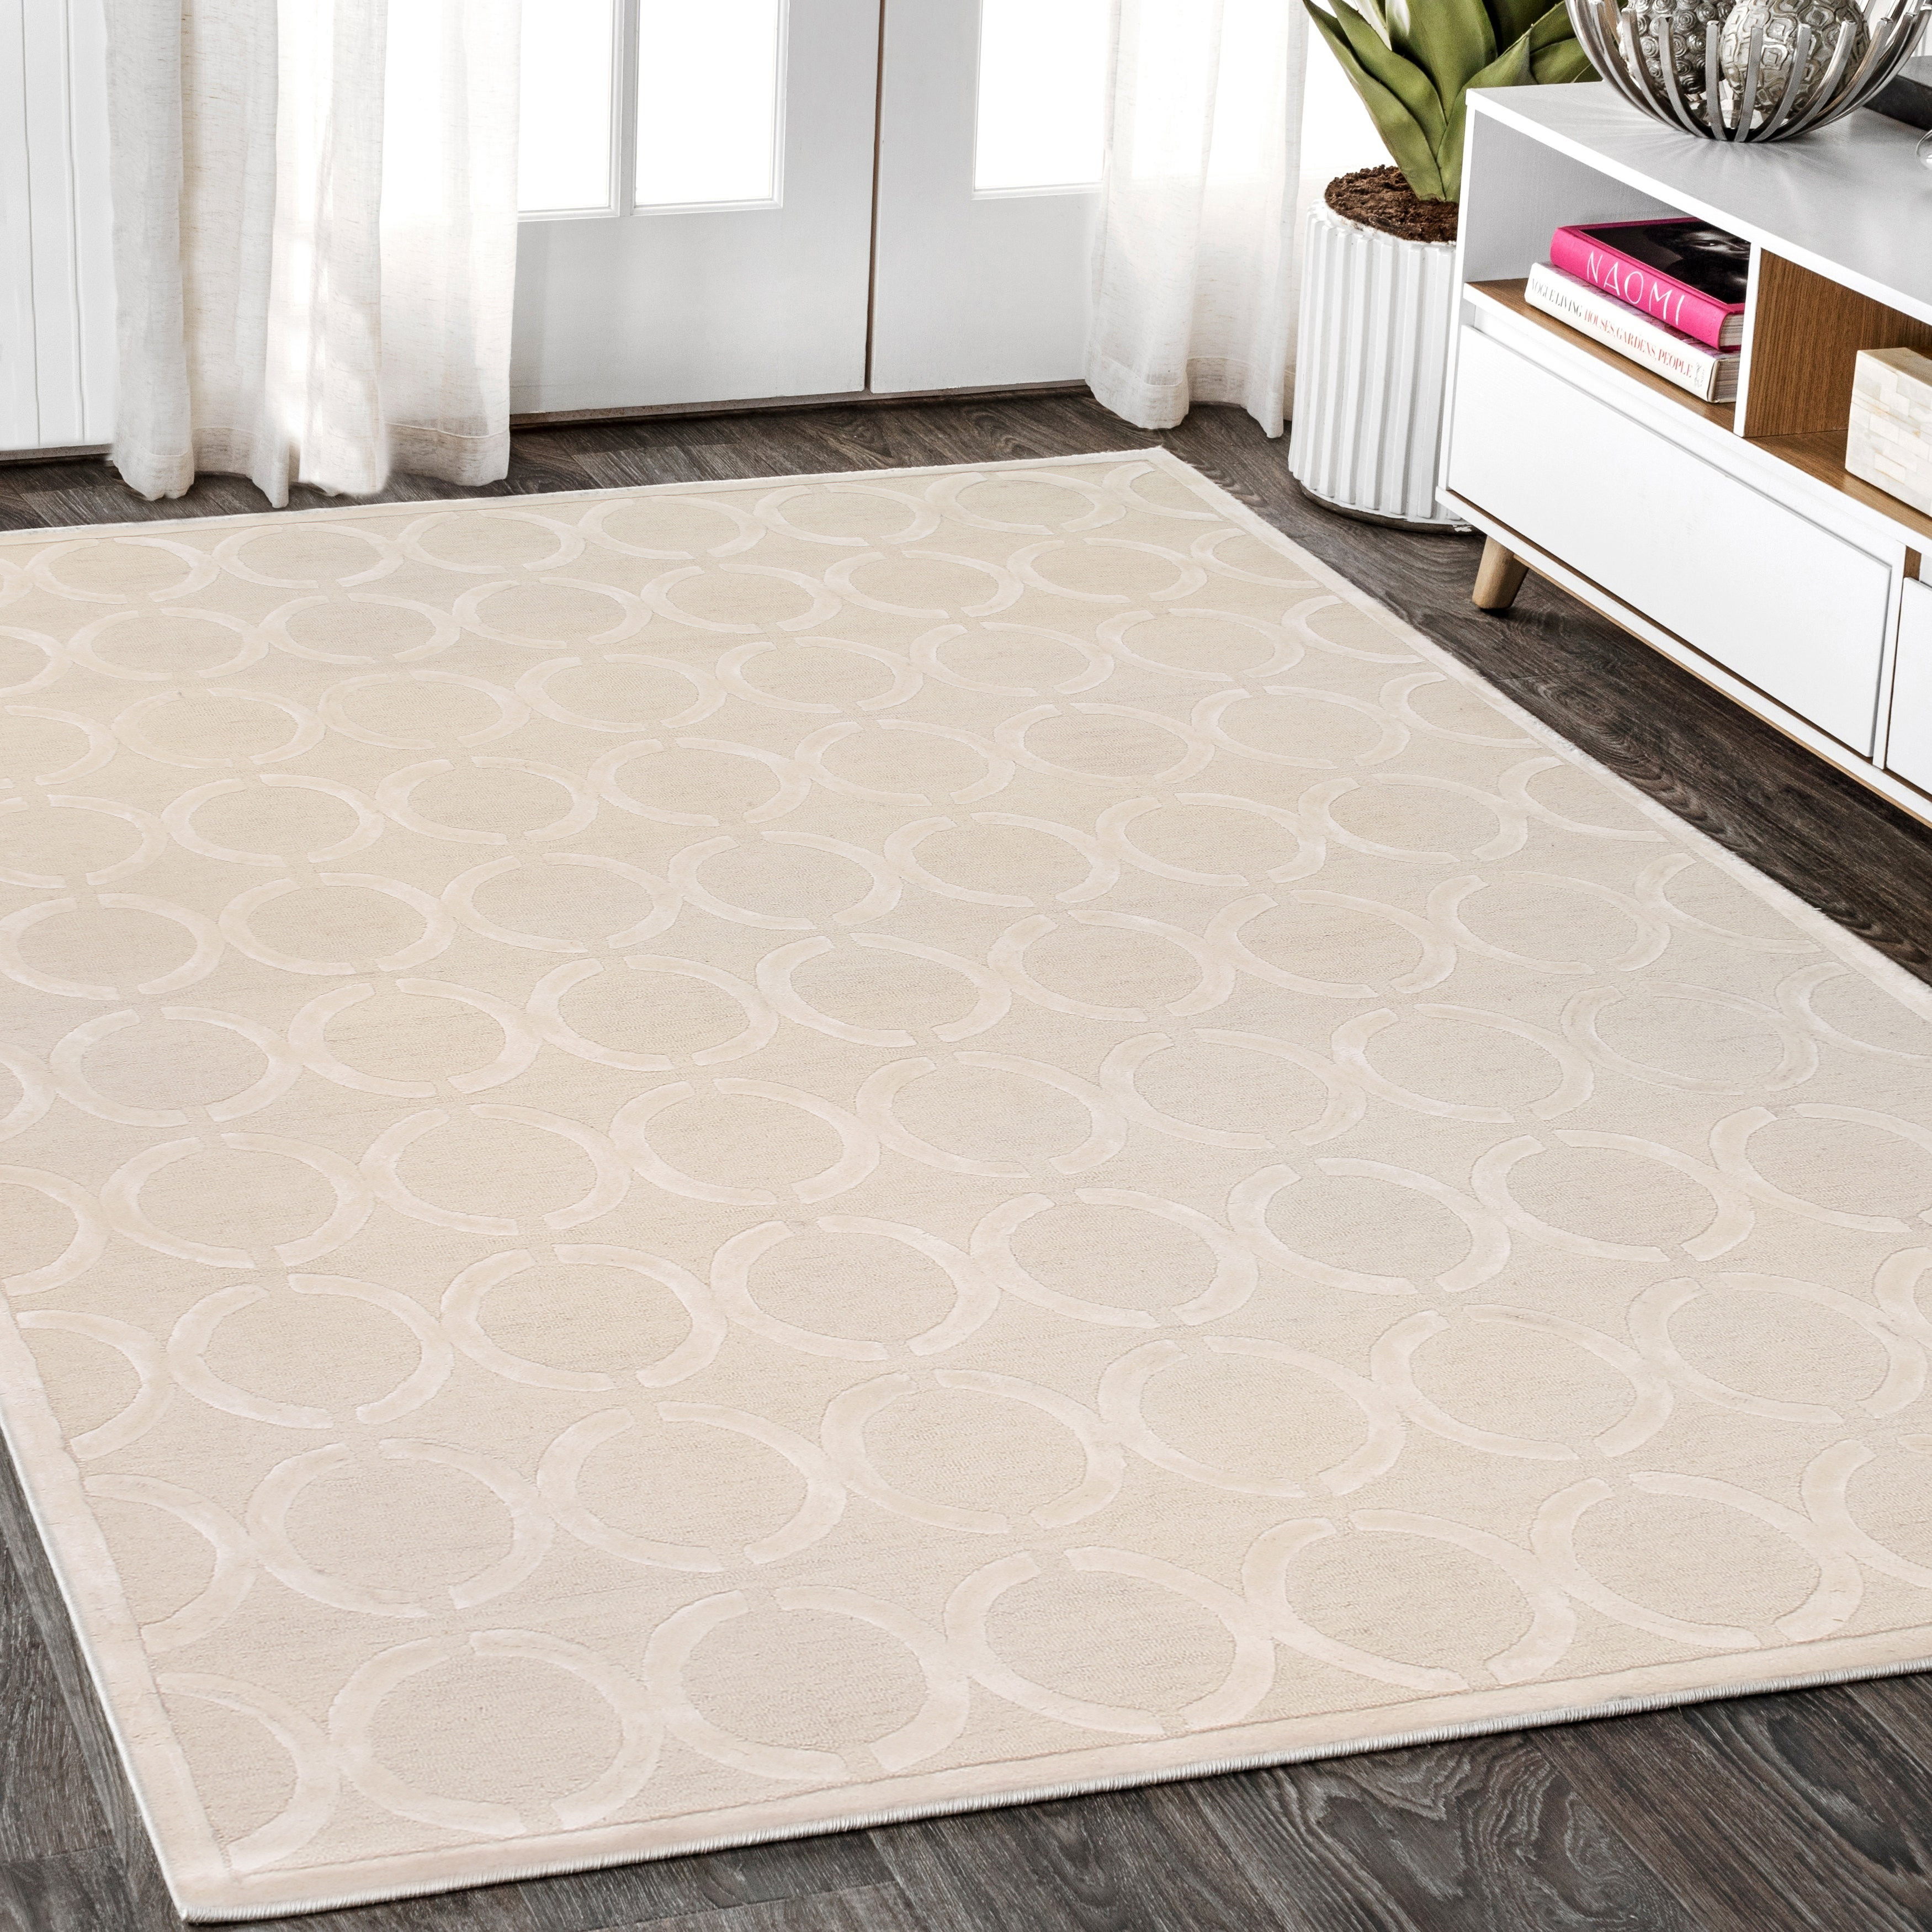 Pasargad Home Edgy Collection Hand-Tufted Silk & Wool Area Rug- 8' 6" X 11' 6" - image 5 of 5